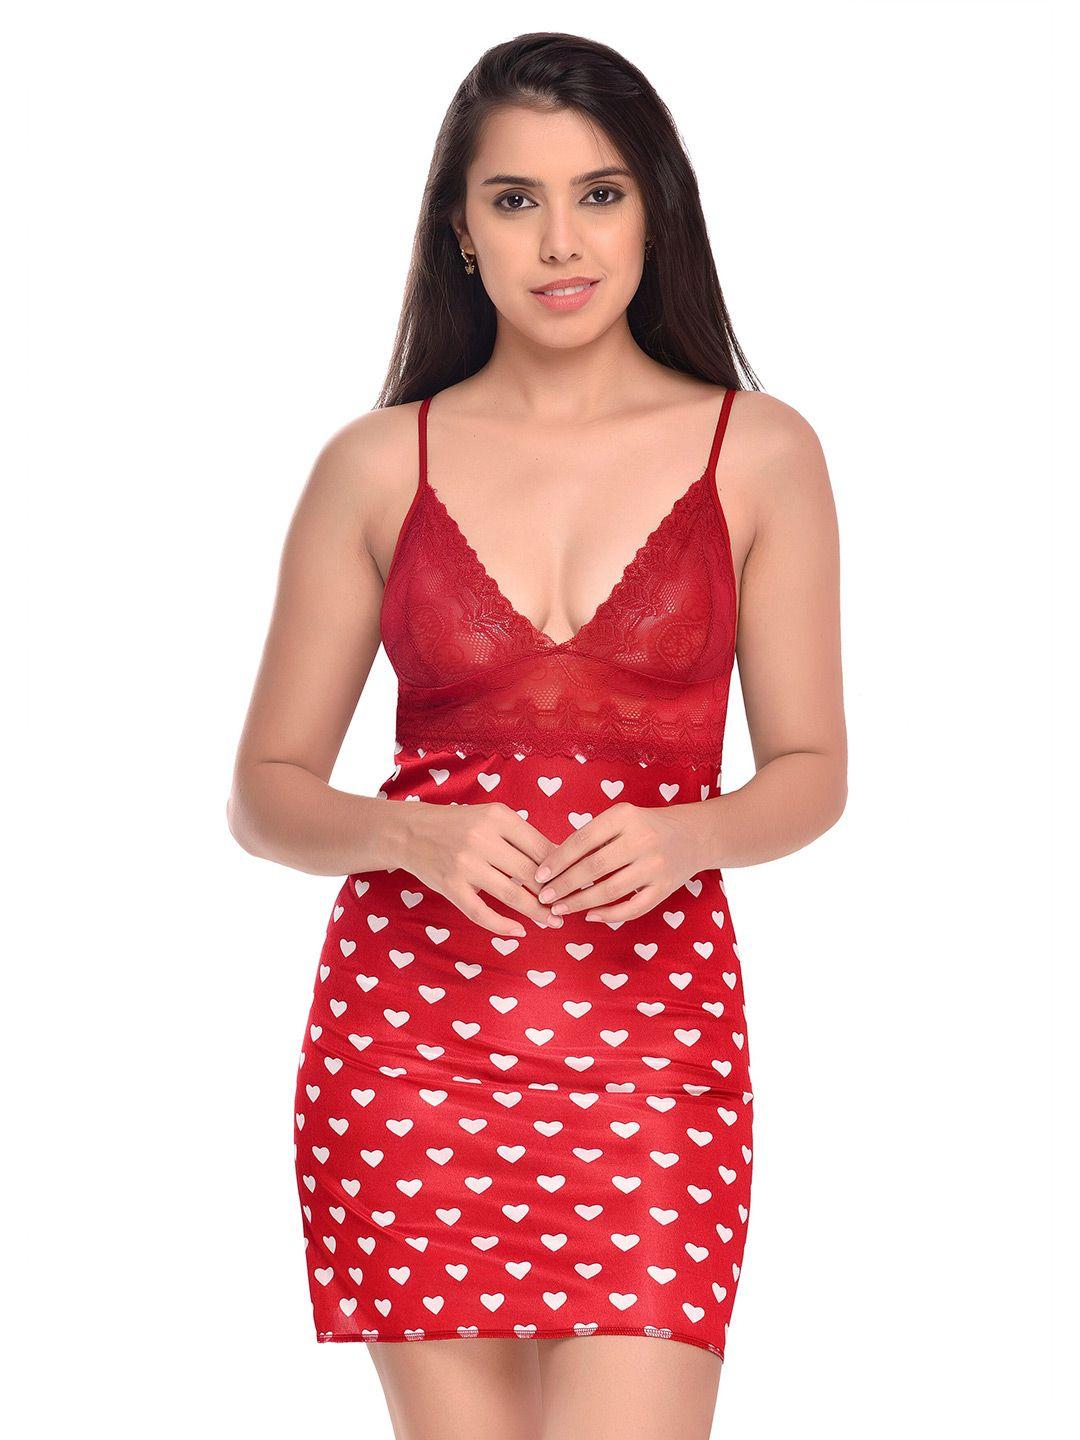 arousy printed shoulder straps net baby doll